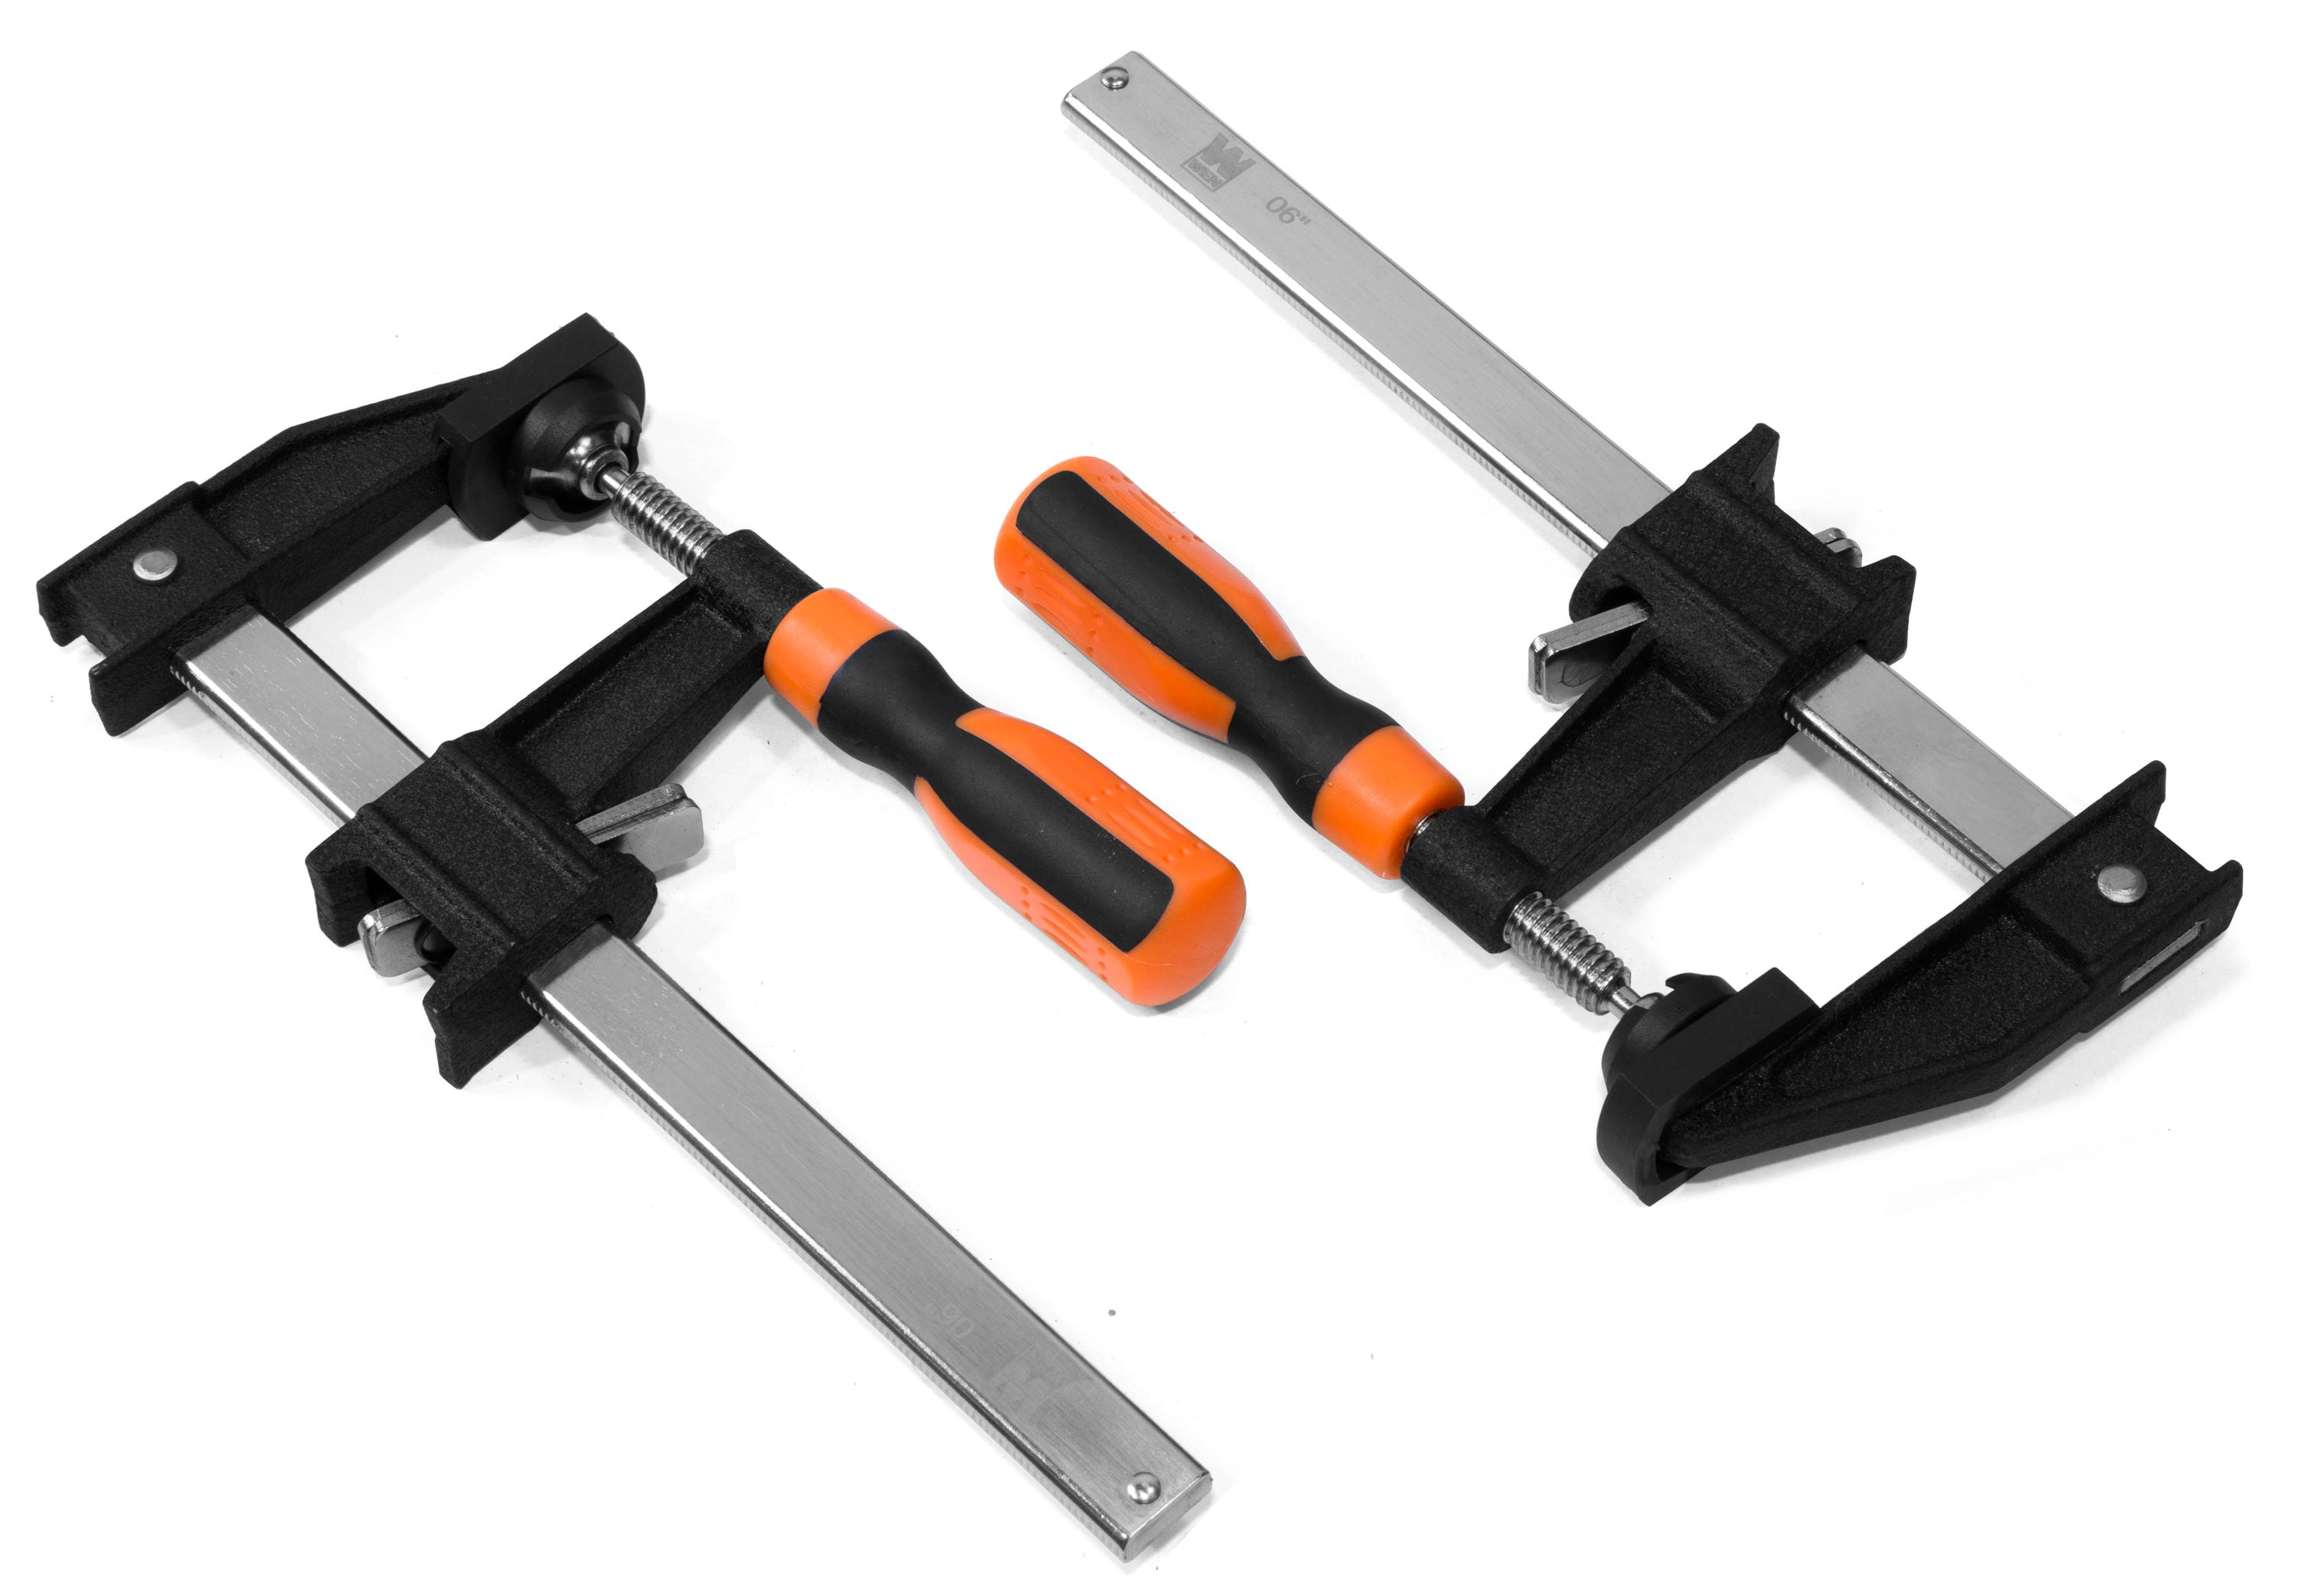 clamps Clutch F Clamps Heavy Duty Bar Clamp Clip Quick Ratchet Release  Speed Squeeze Wood Working Work Bar Clip Kit Woodworking Clamps This clip  is